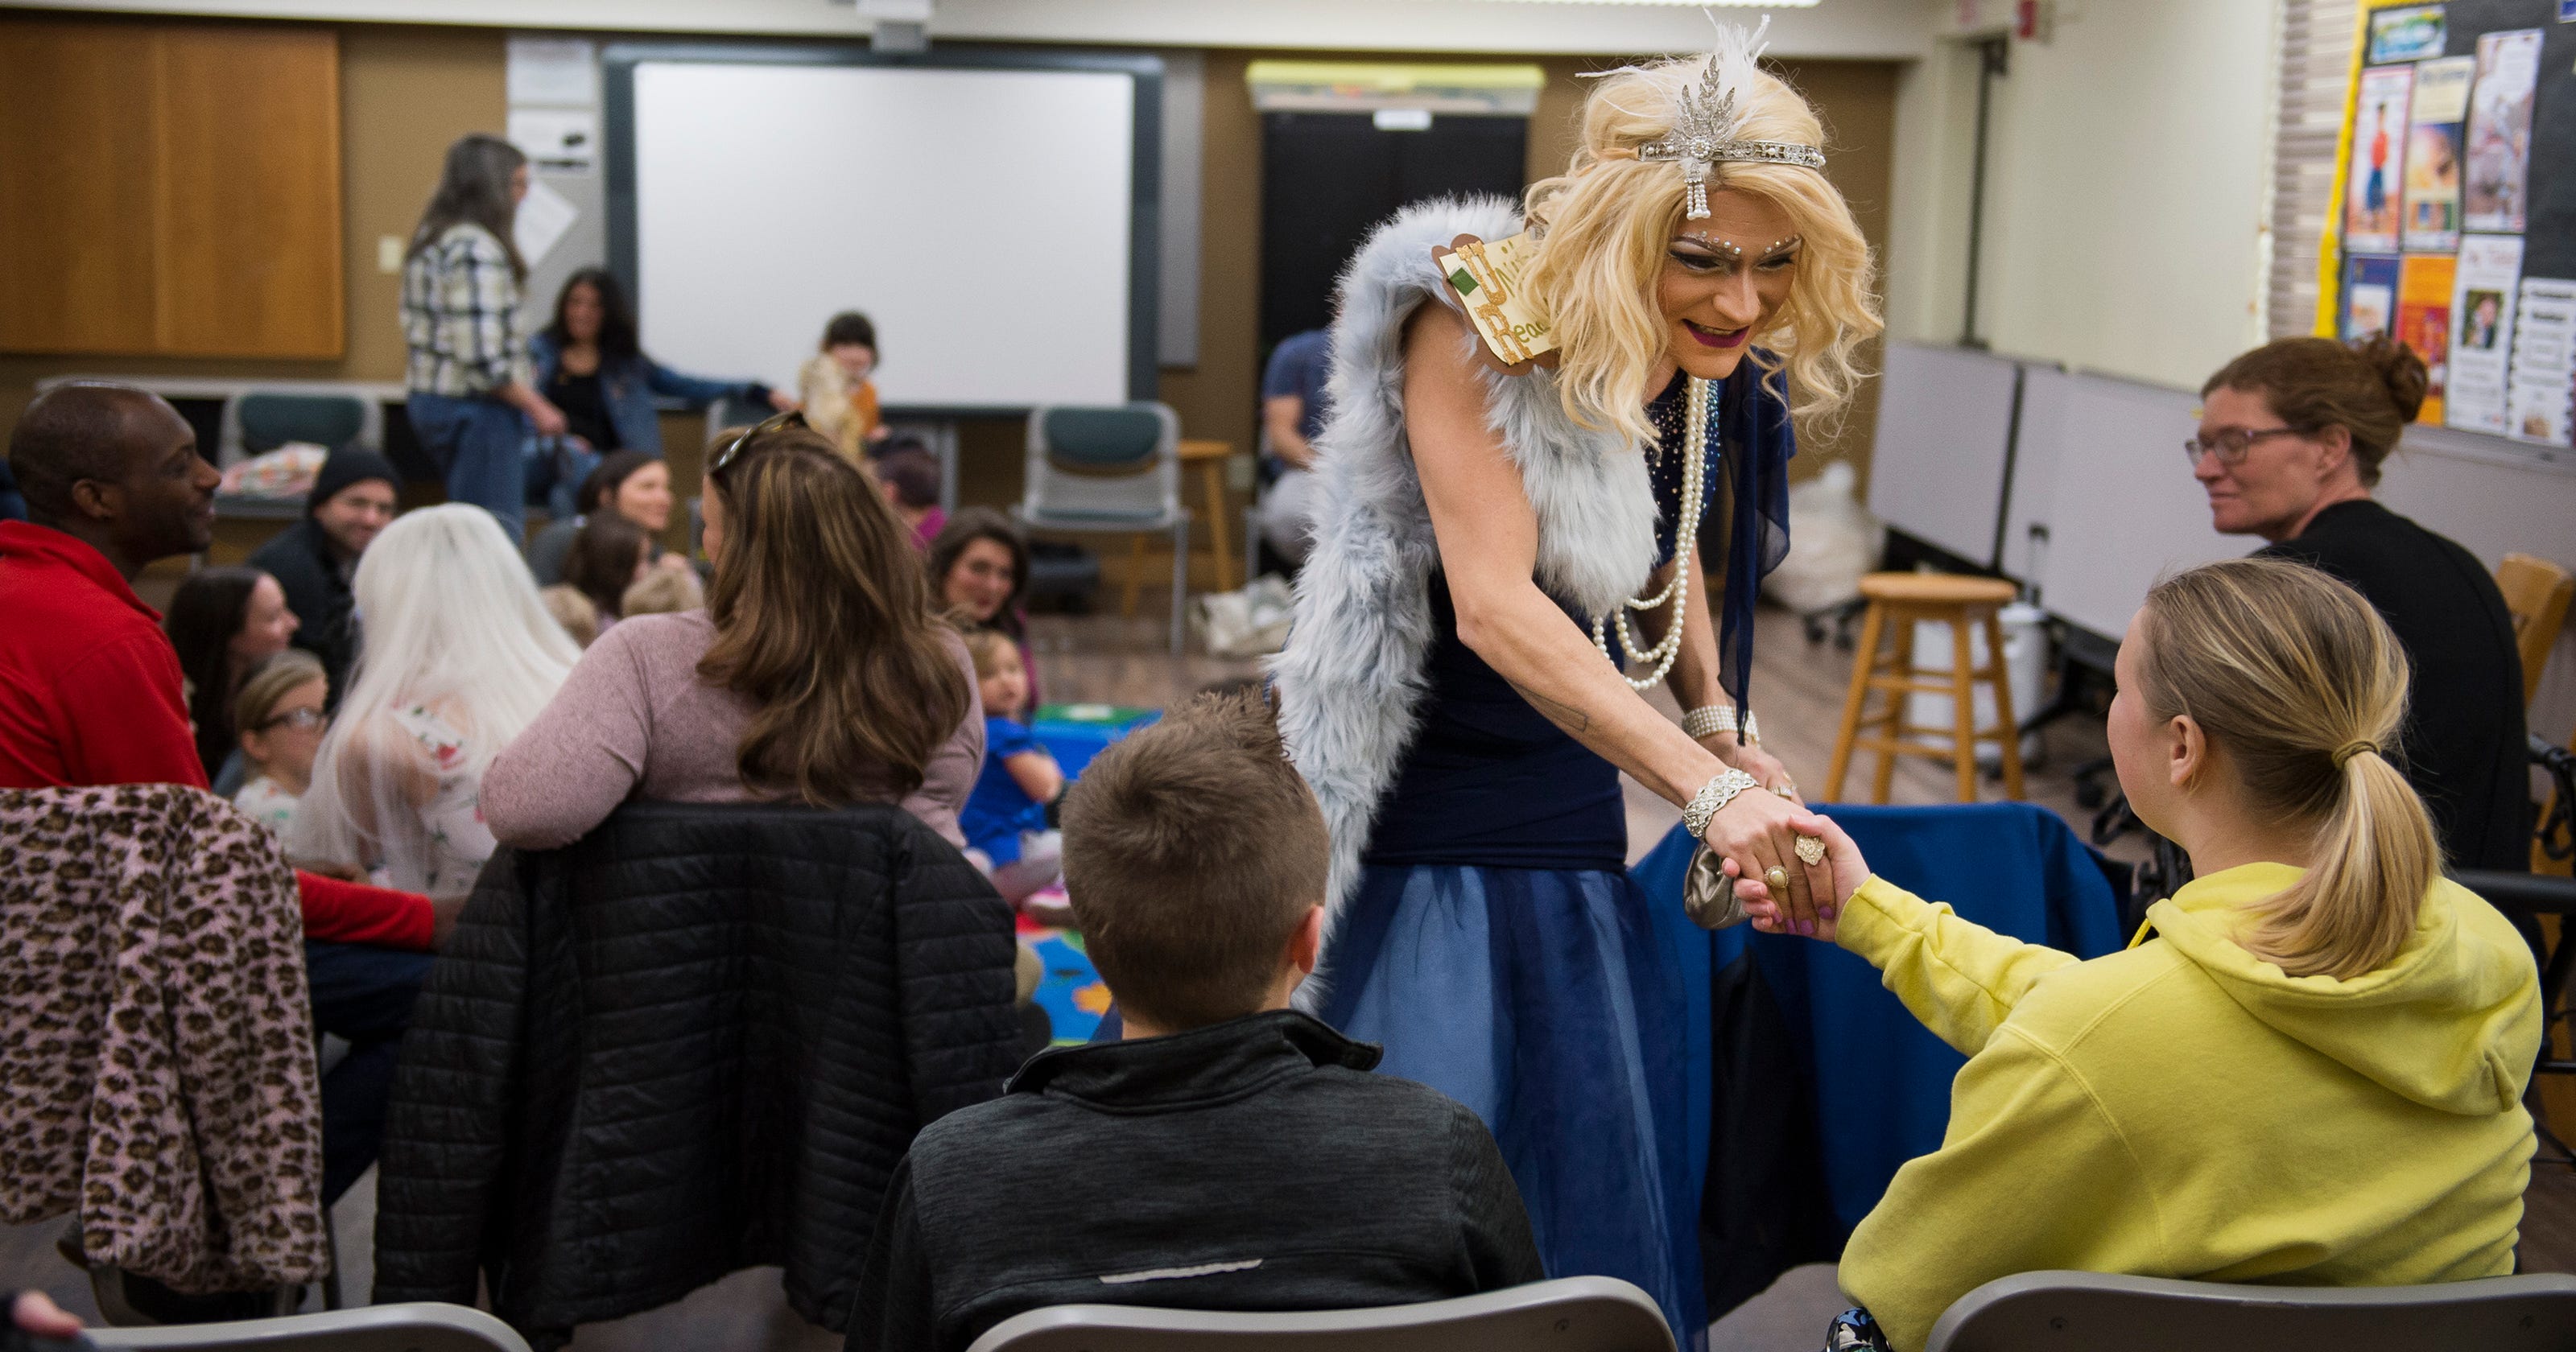 Colorado town's Drag Queen Story Hour draws protesters, counter protesters